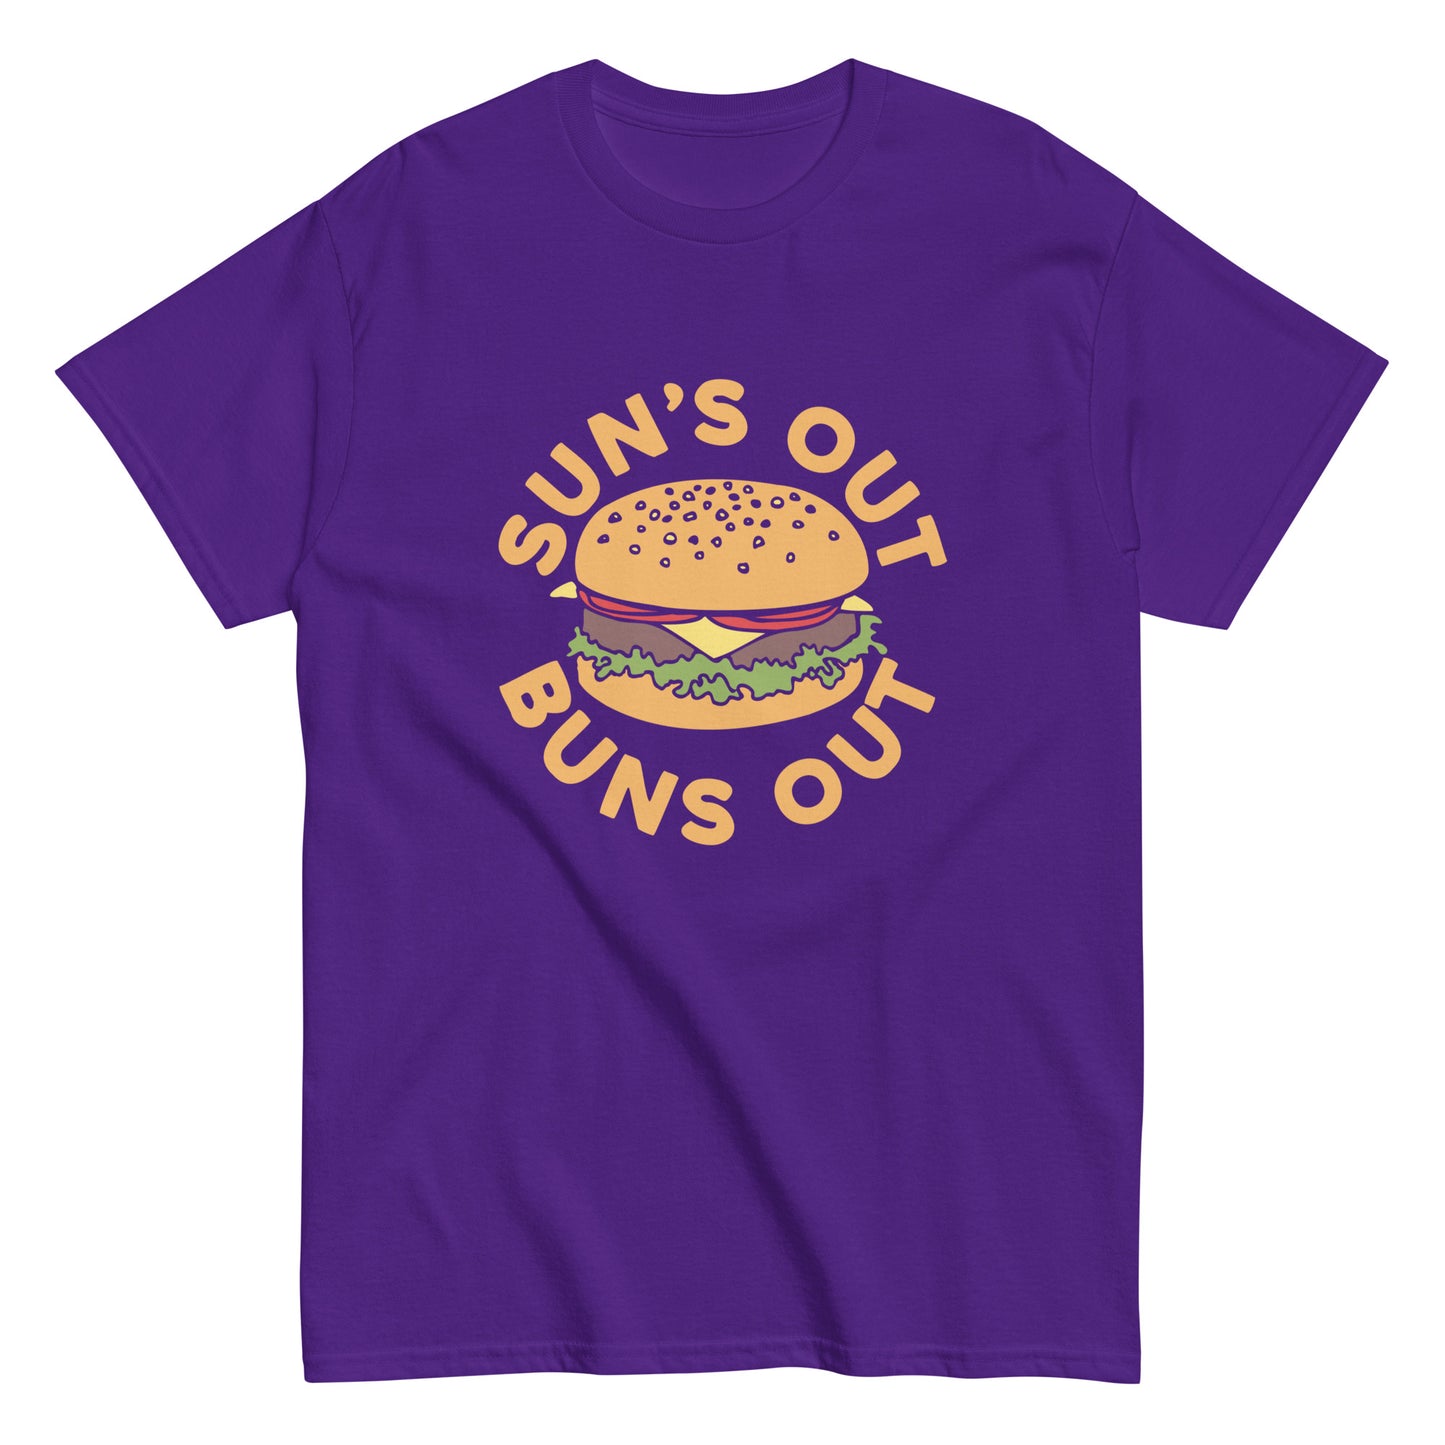 Sun's Out Buns Out Men's Classic Tee